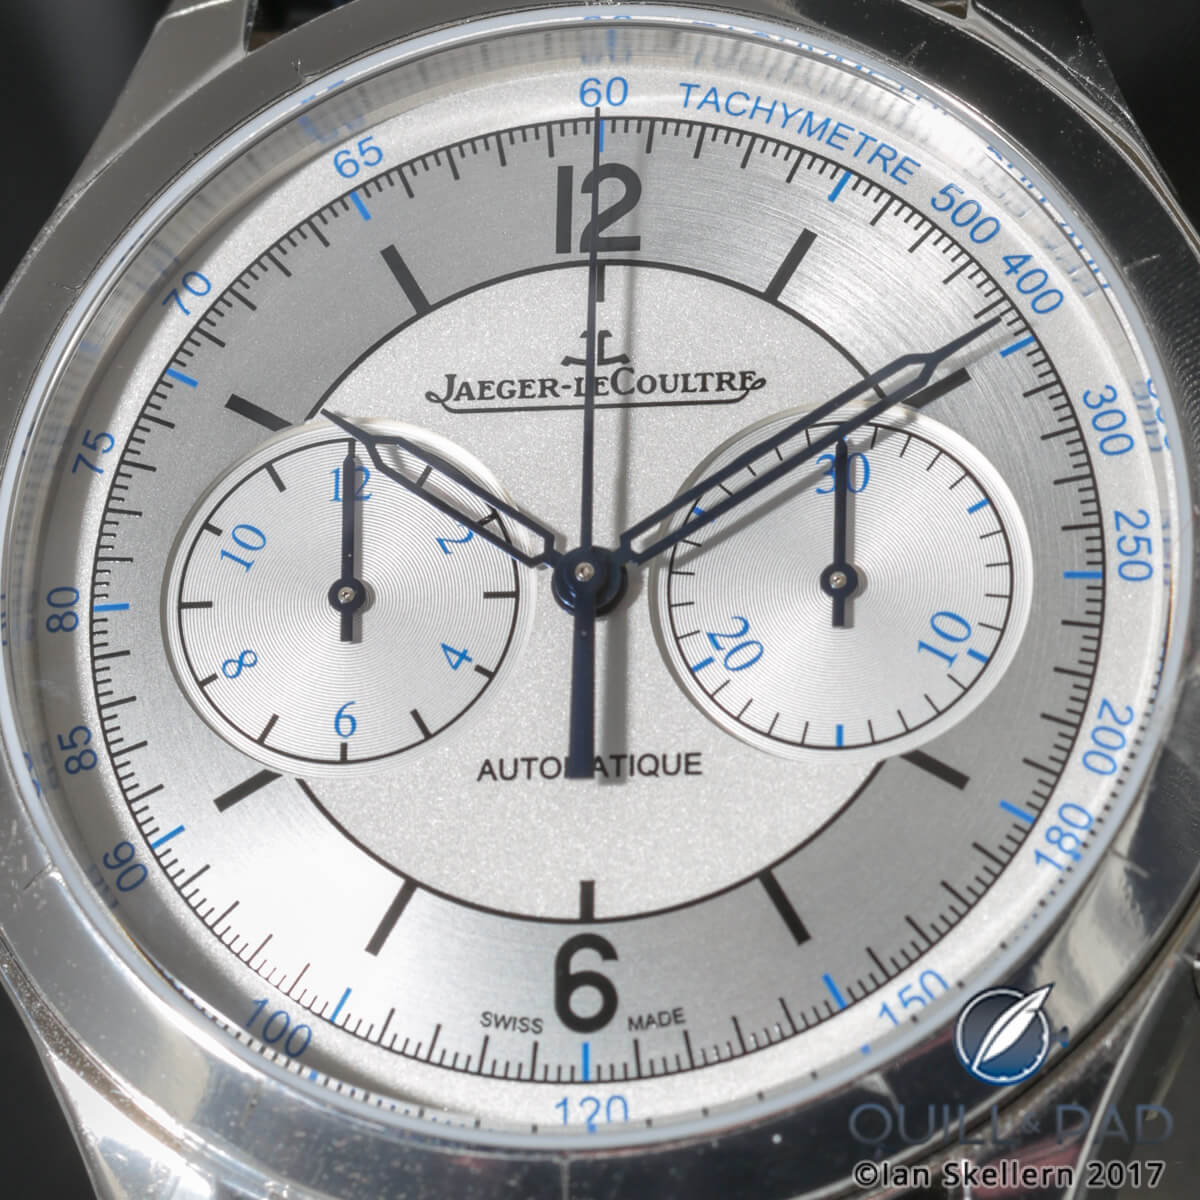 Close up look at the dial of the Jaeger-LeCoultre Master Control Chronograph